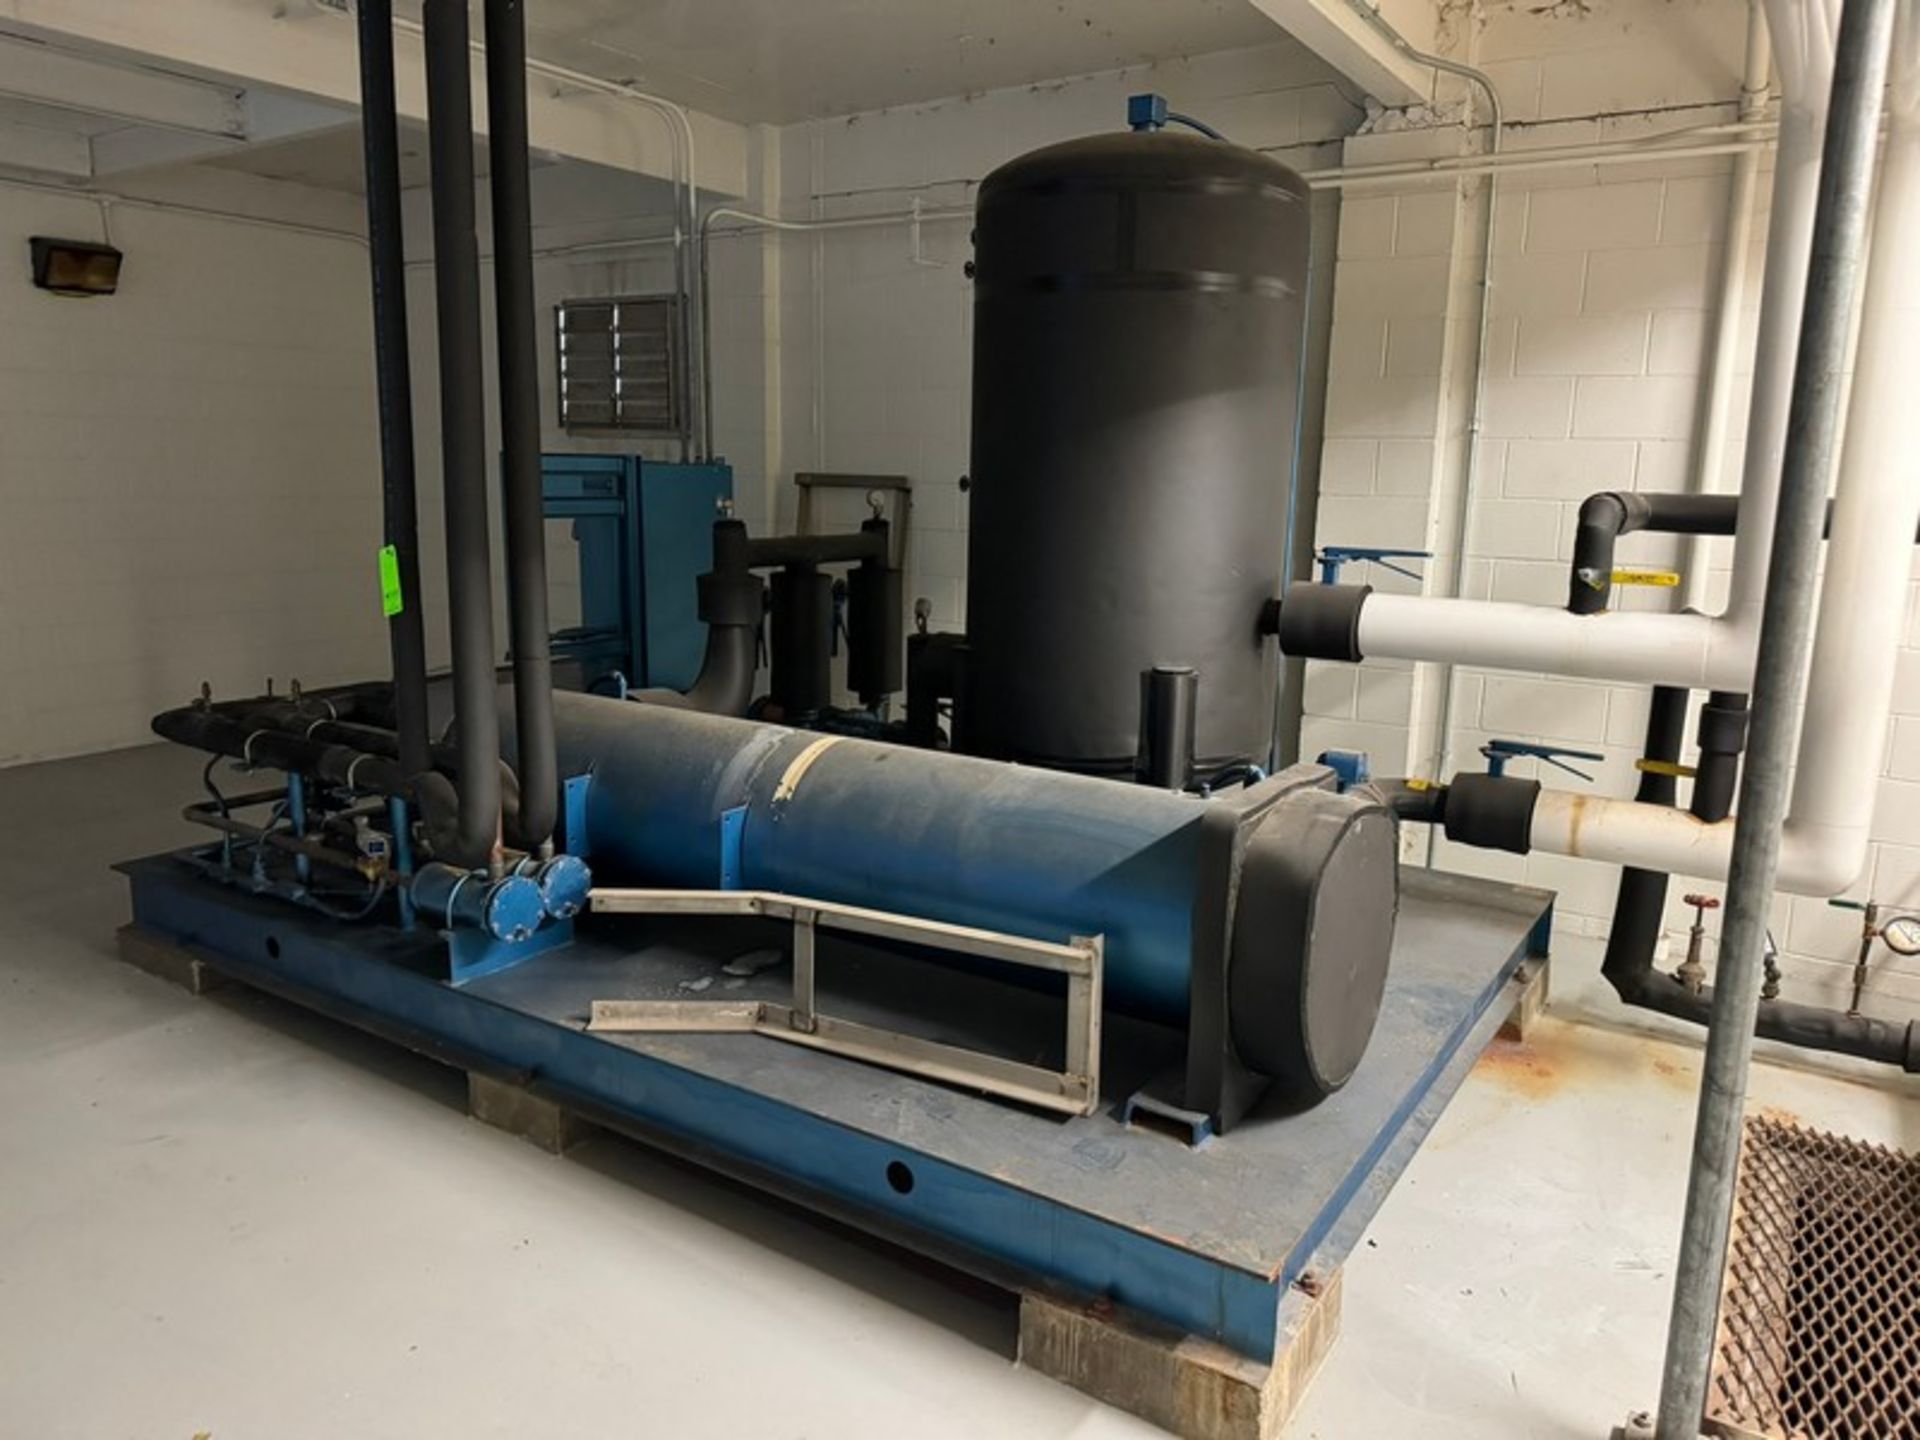 HydroThrift Chiller, with (2) Centrifugal Pumps, Alpha-Laval Plate Heat Exchanger, Control